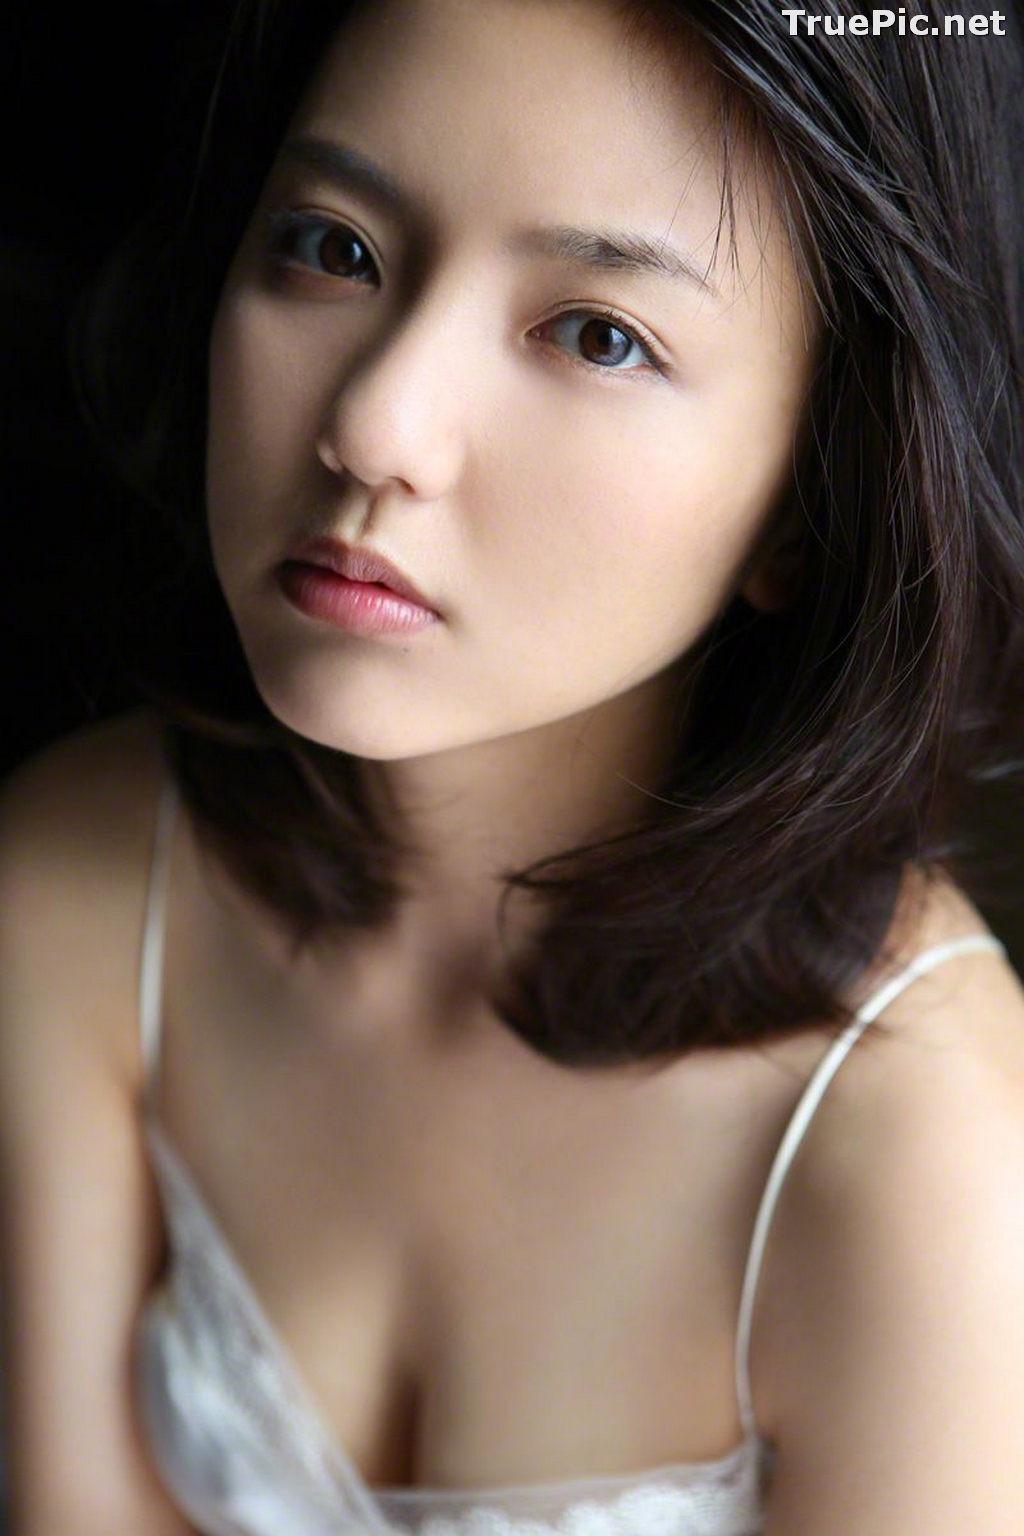 Image [WBGC Photograph] No.131 - Japanese Singer and Actress - Erina Mano - TruePic.net - Picture-161